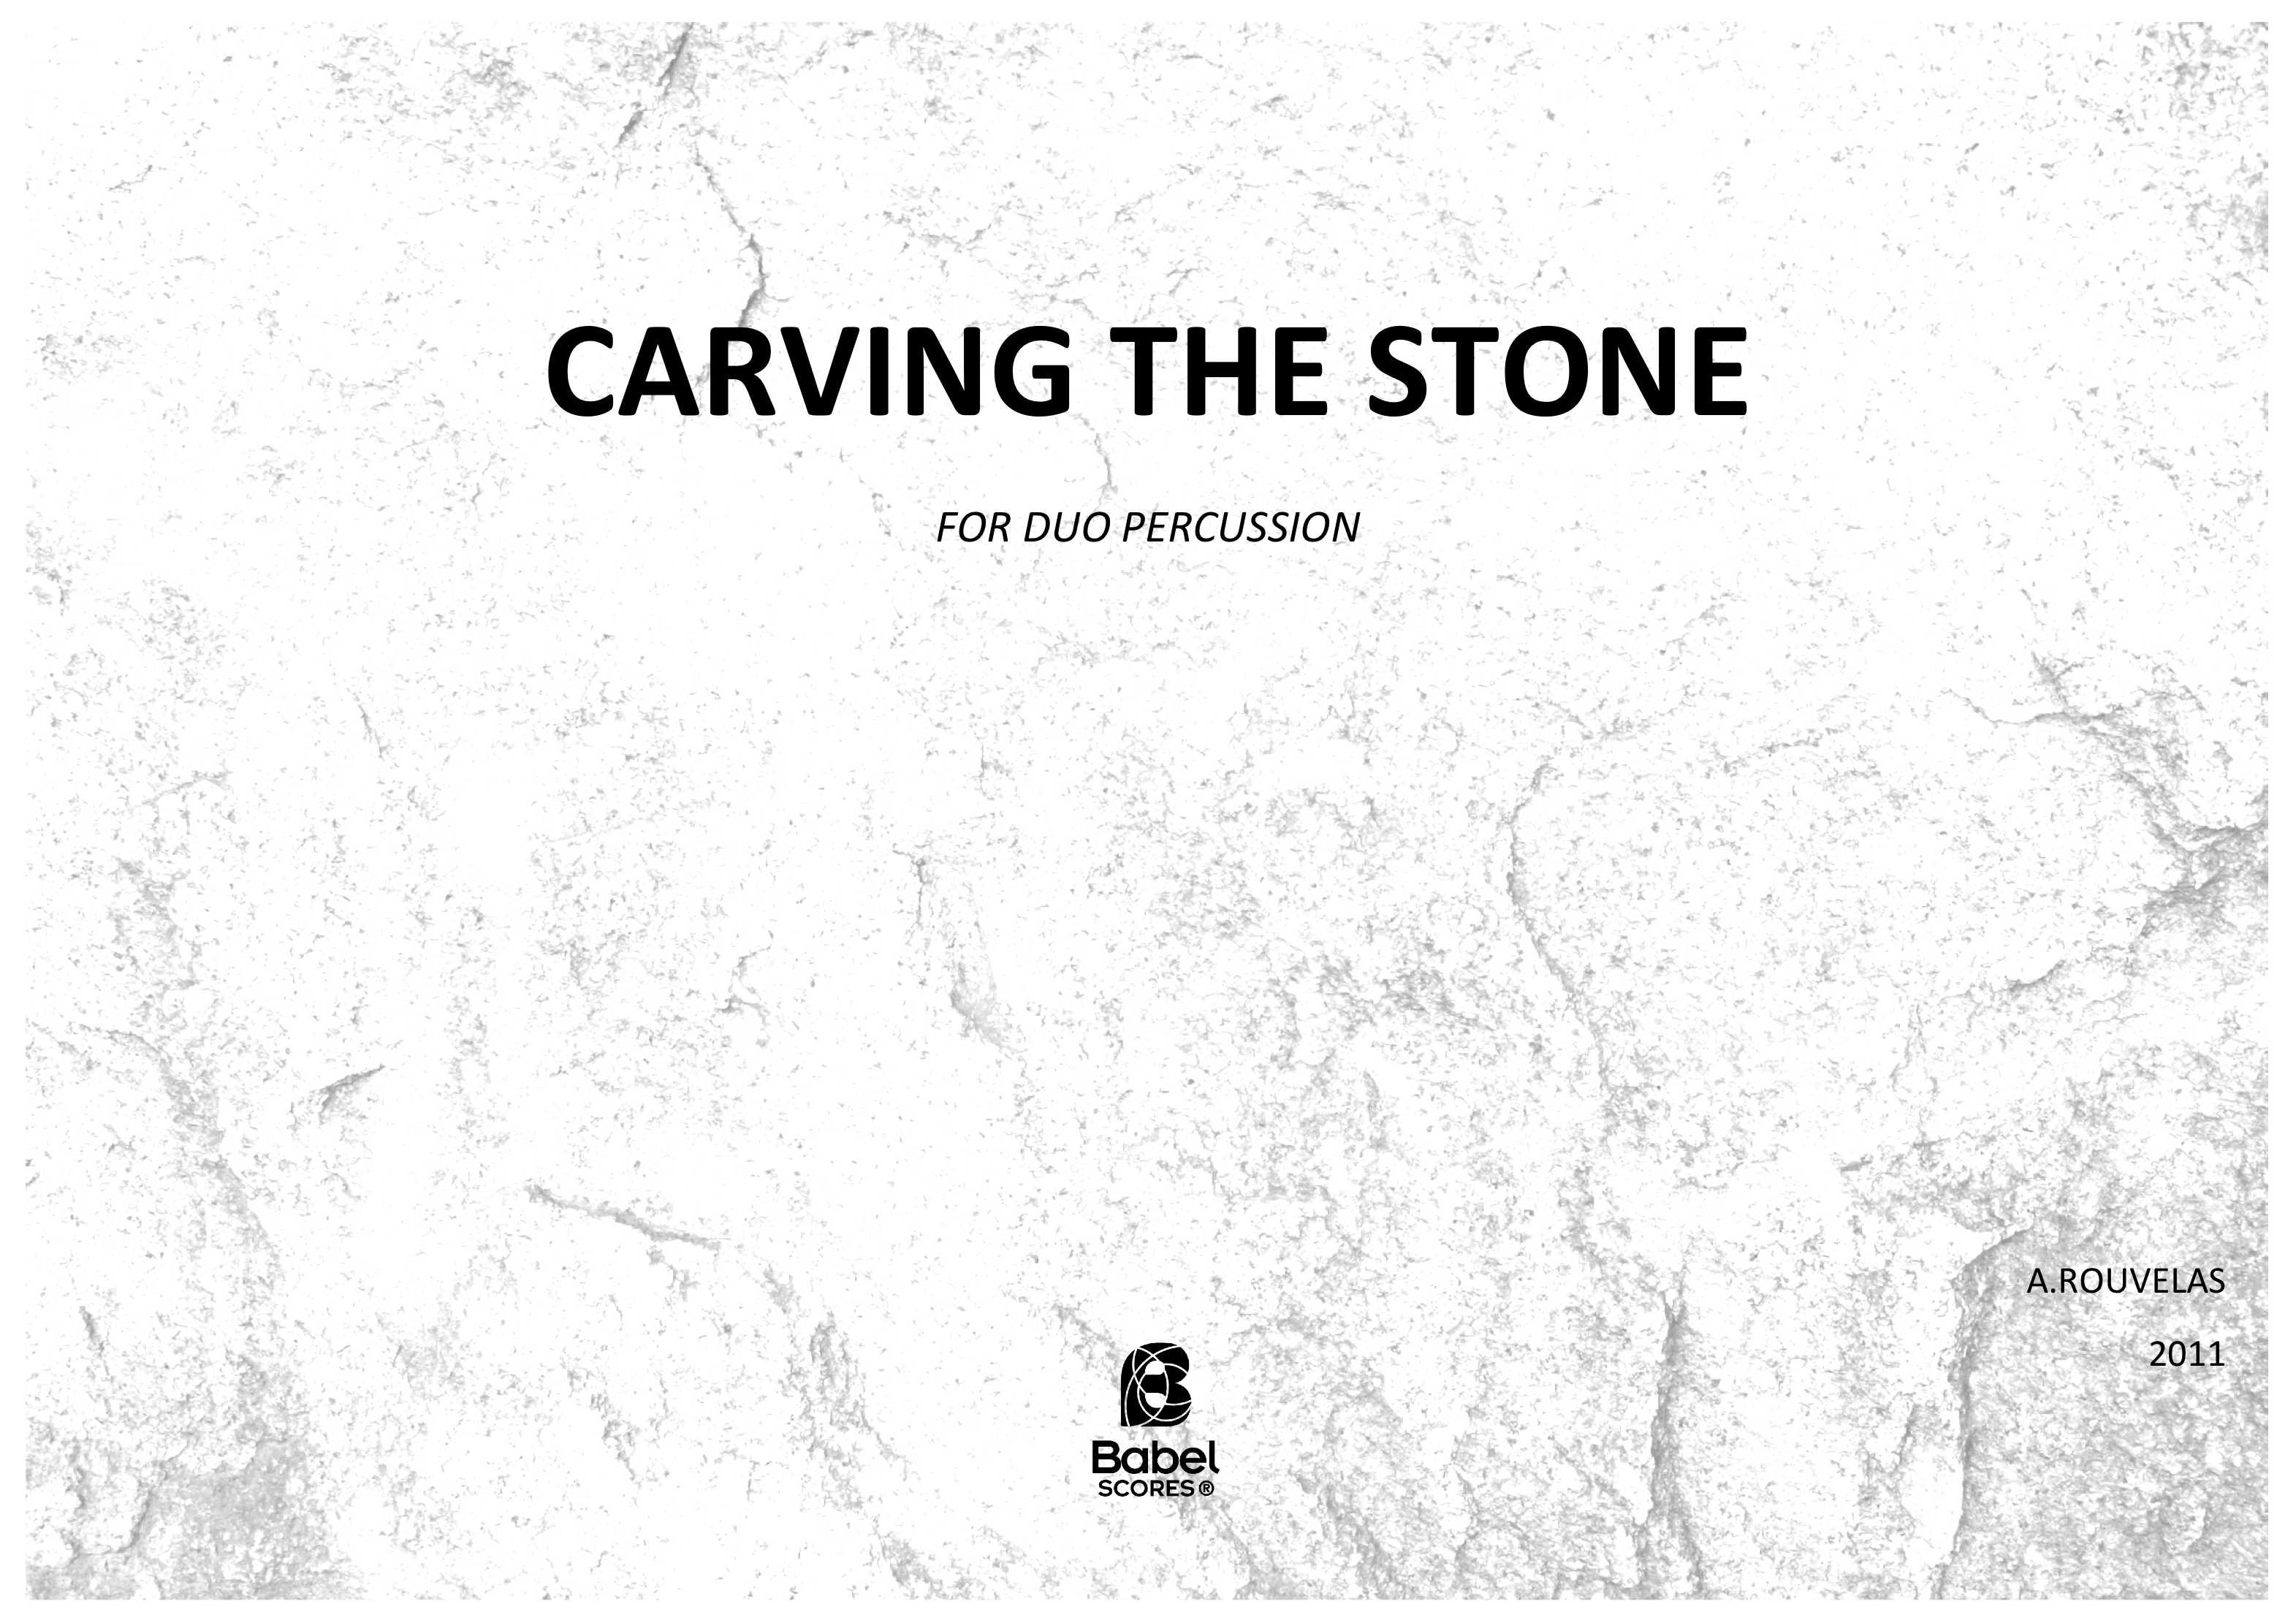 Carving the stone score z